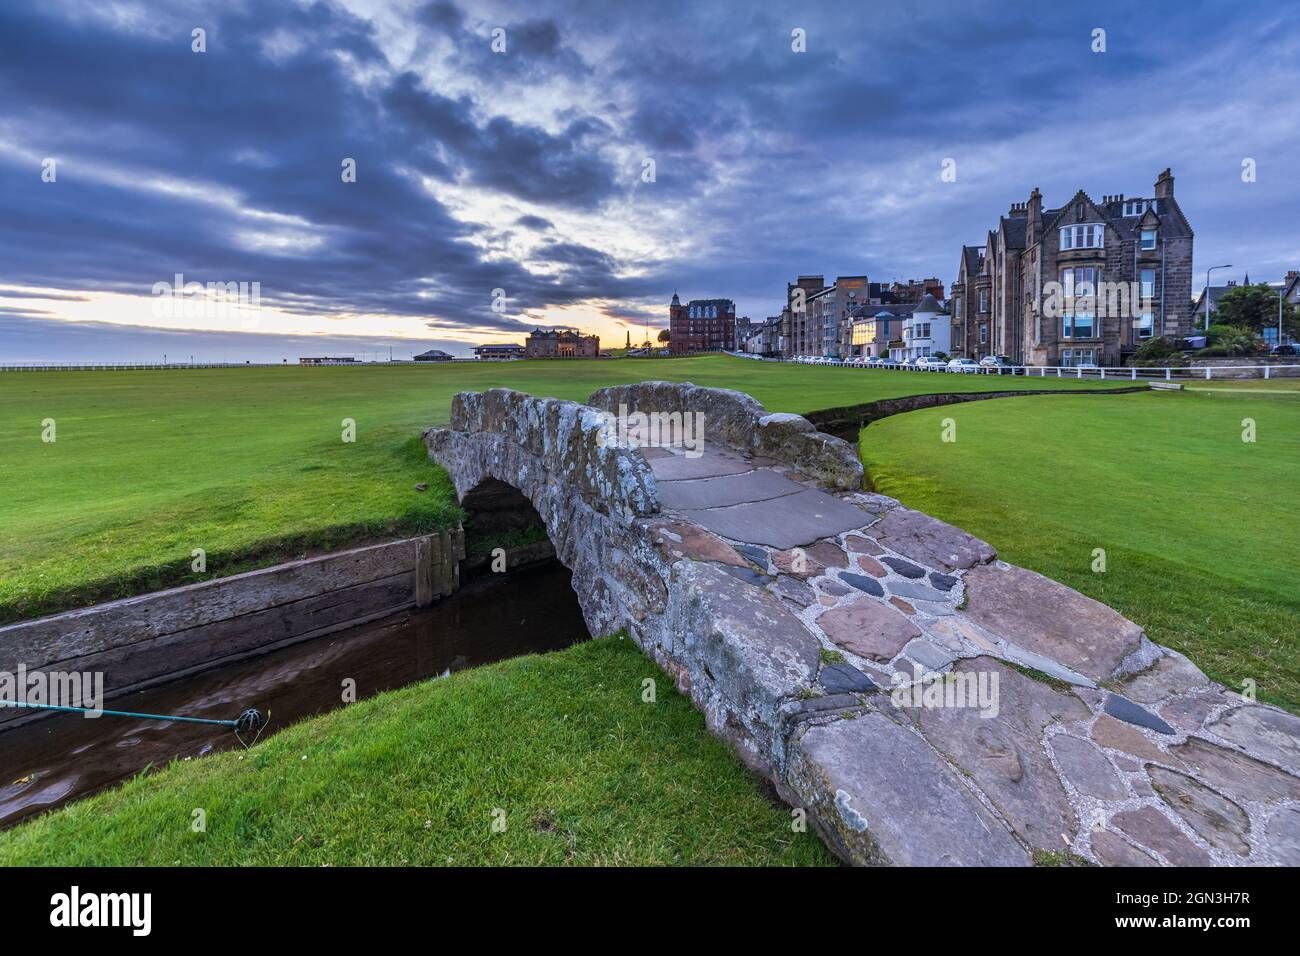 The famous Swilken (or Swilcan) Bridge over Swilken Burn between the first and eighteenth fairways of the Old Course at St Andrews in Fife, Scotland. Stock Photo